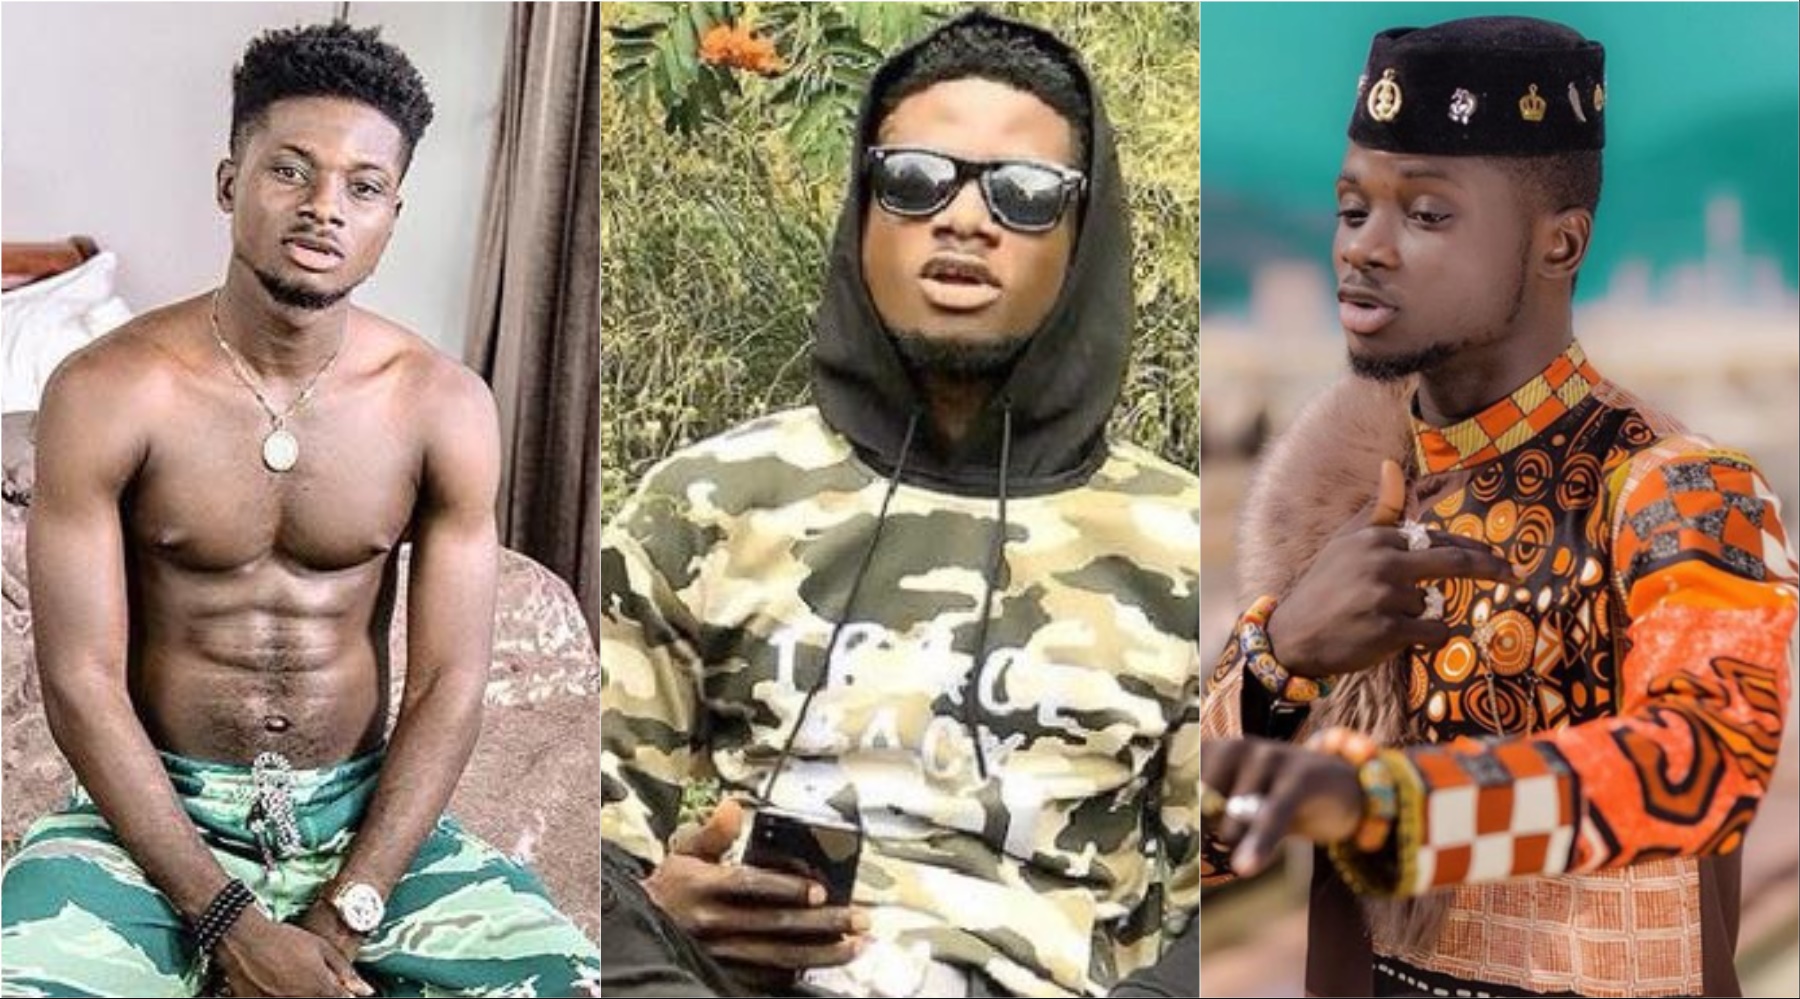 Because of my mum I can't have piercings or tattoos - Kuami Eugene opens up